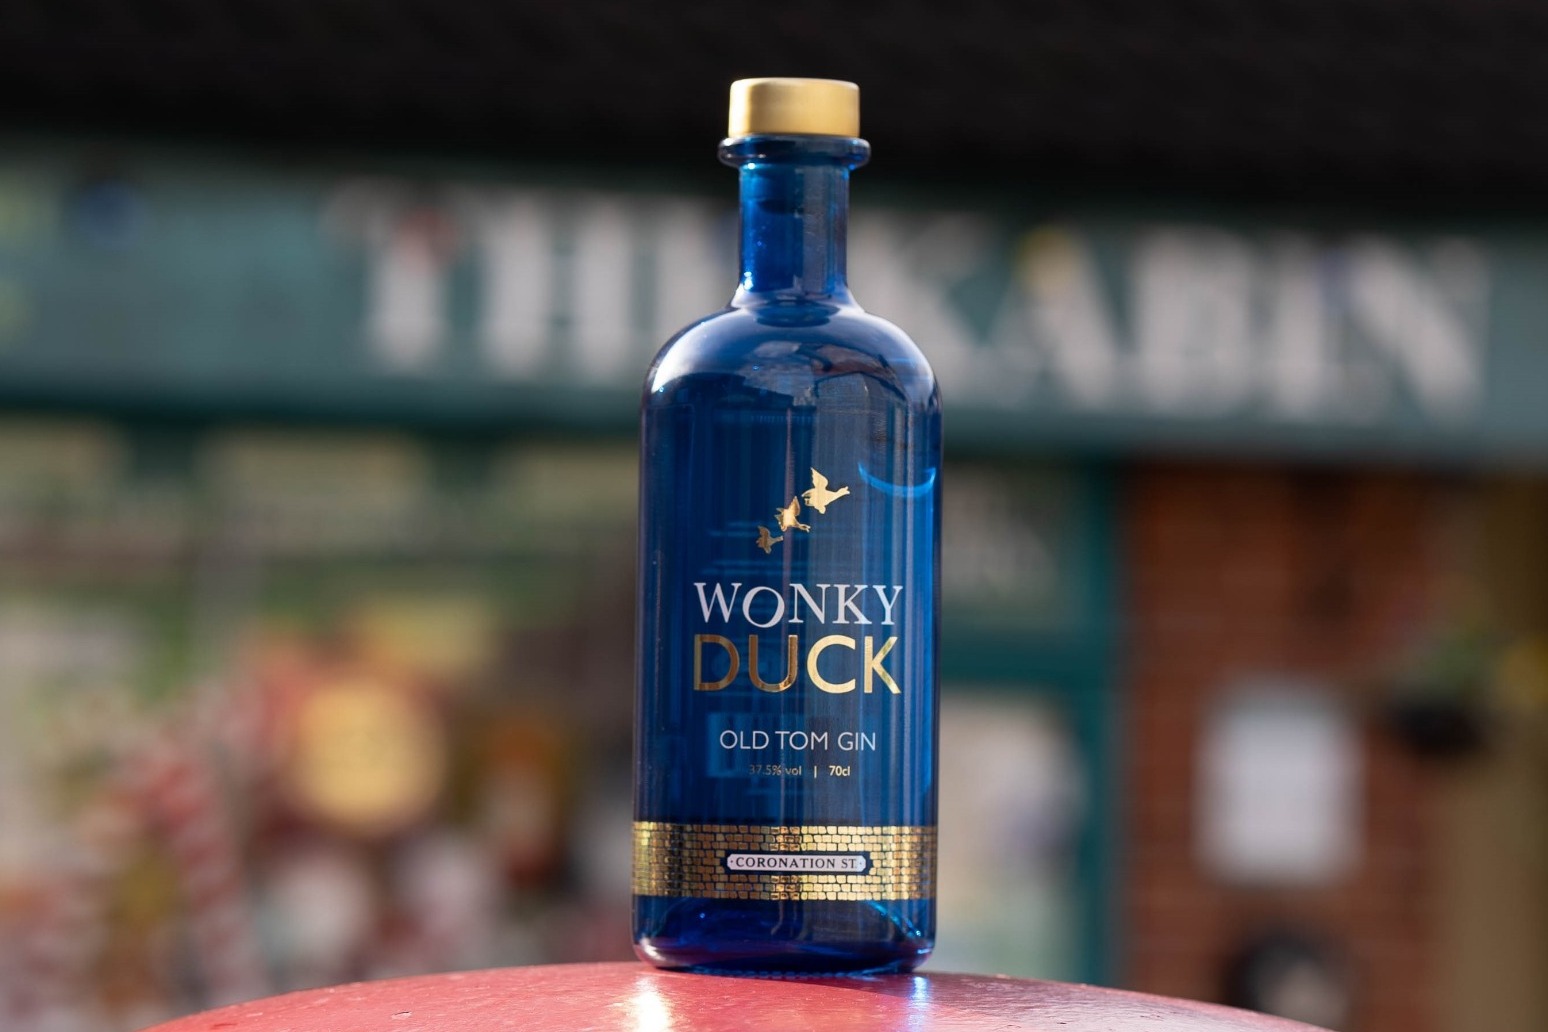 Coronation Street gin goes on sale in honour of Hilda Ogden’s ‘wonky duck’ 